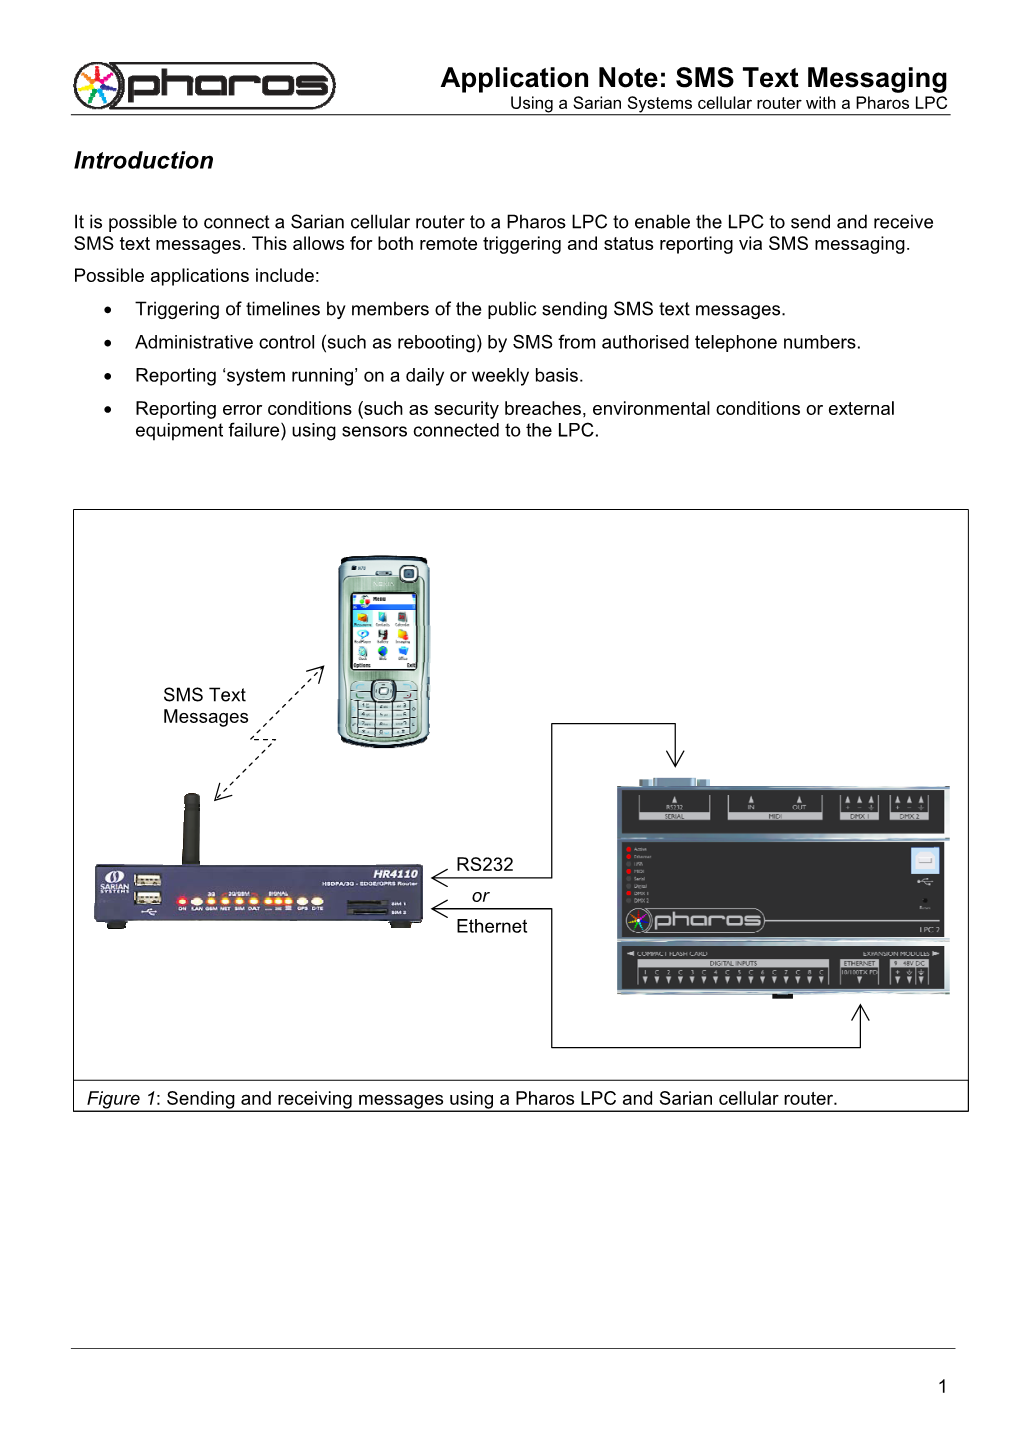 Application Note: SMS Text Messaging Using a Sarian Systems Cellular Router with a Pharos LPC